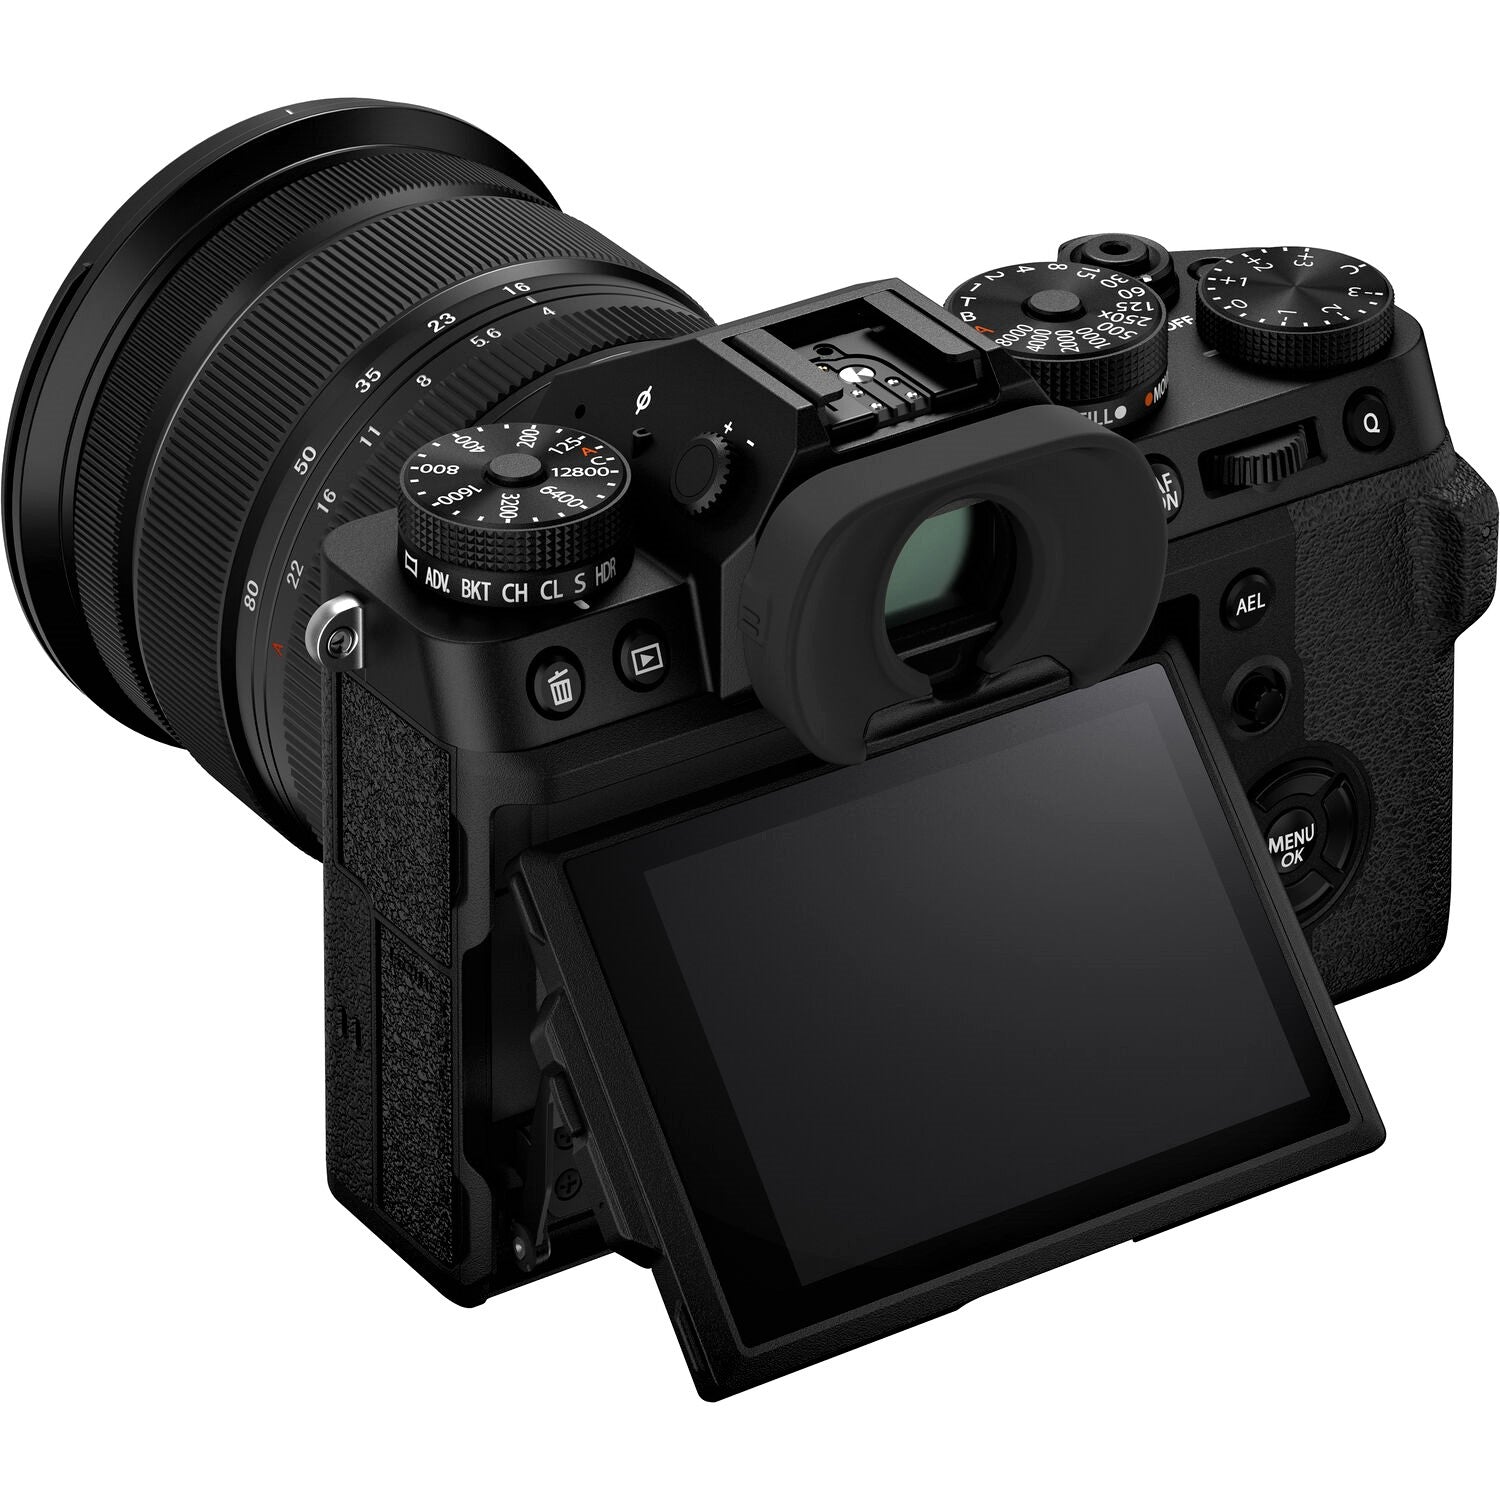 Fujifilm X-T5 Mirrorless Camera with 16-80mm Lens (Black) with screen (Horizontal)